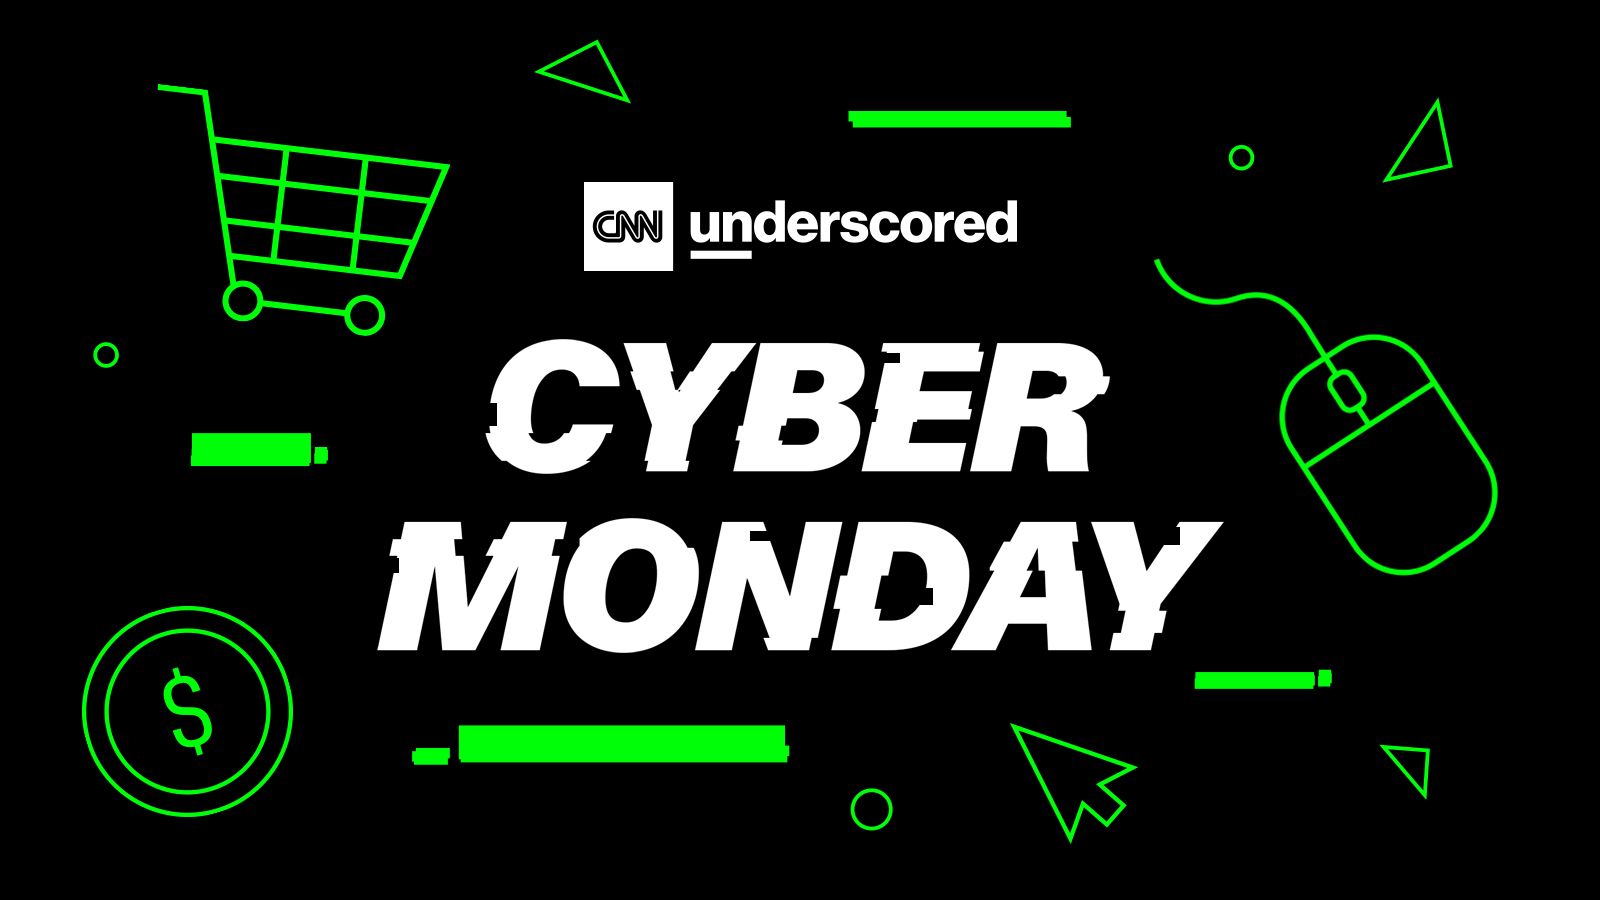 cyber monday images